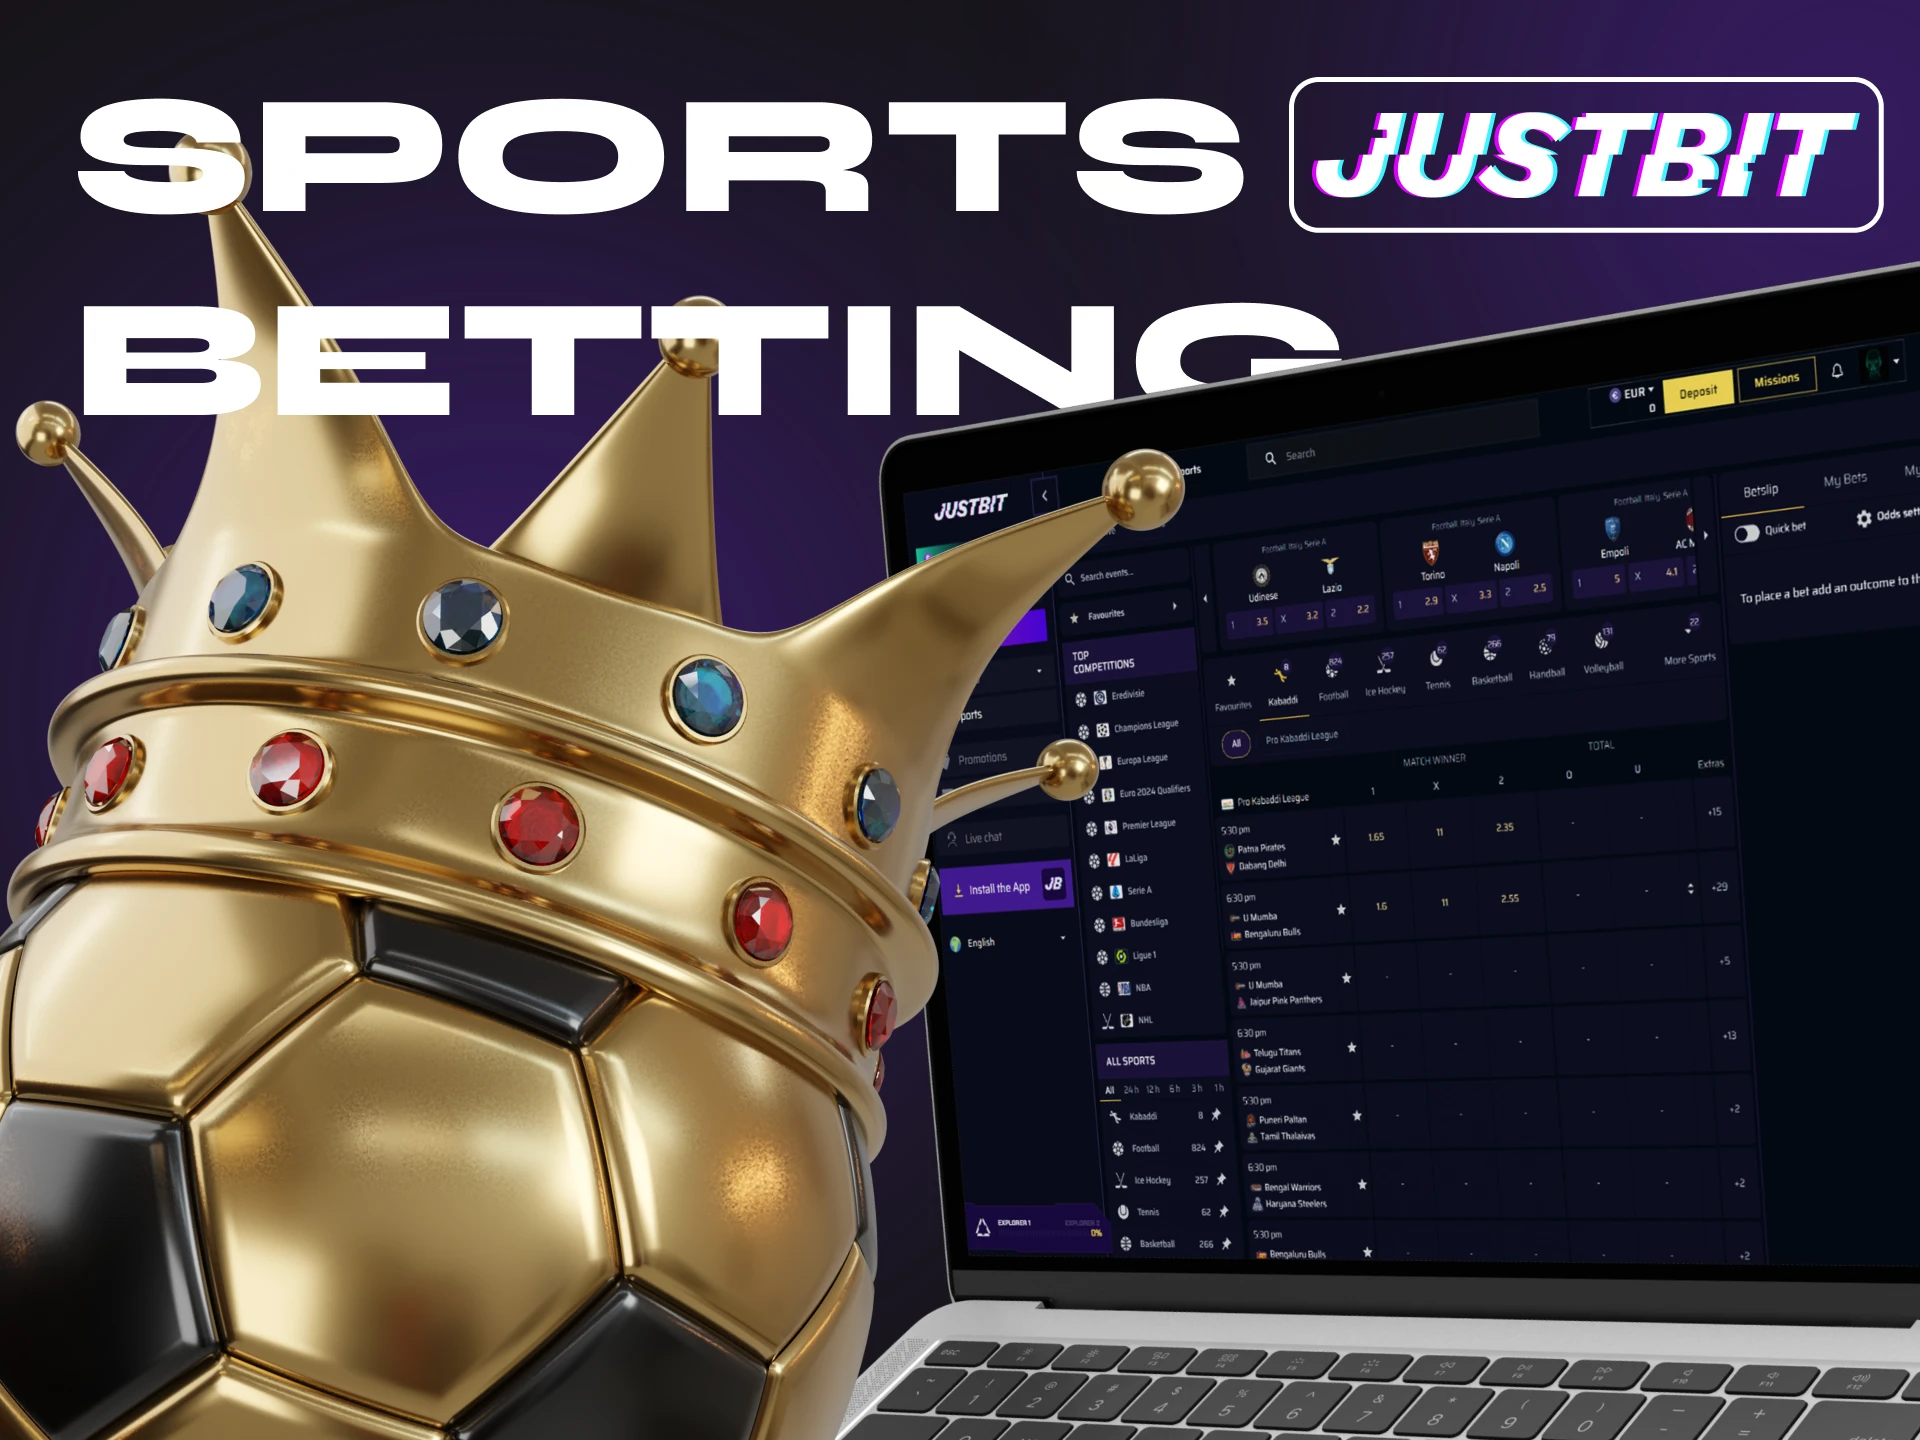 If you like to bet on sports, try Justbit crypto casino.